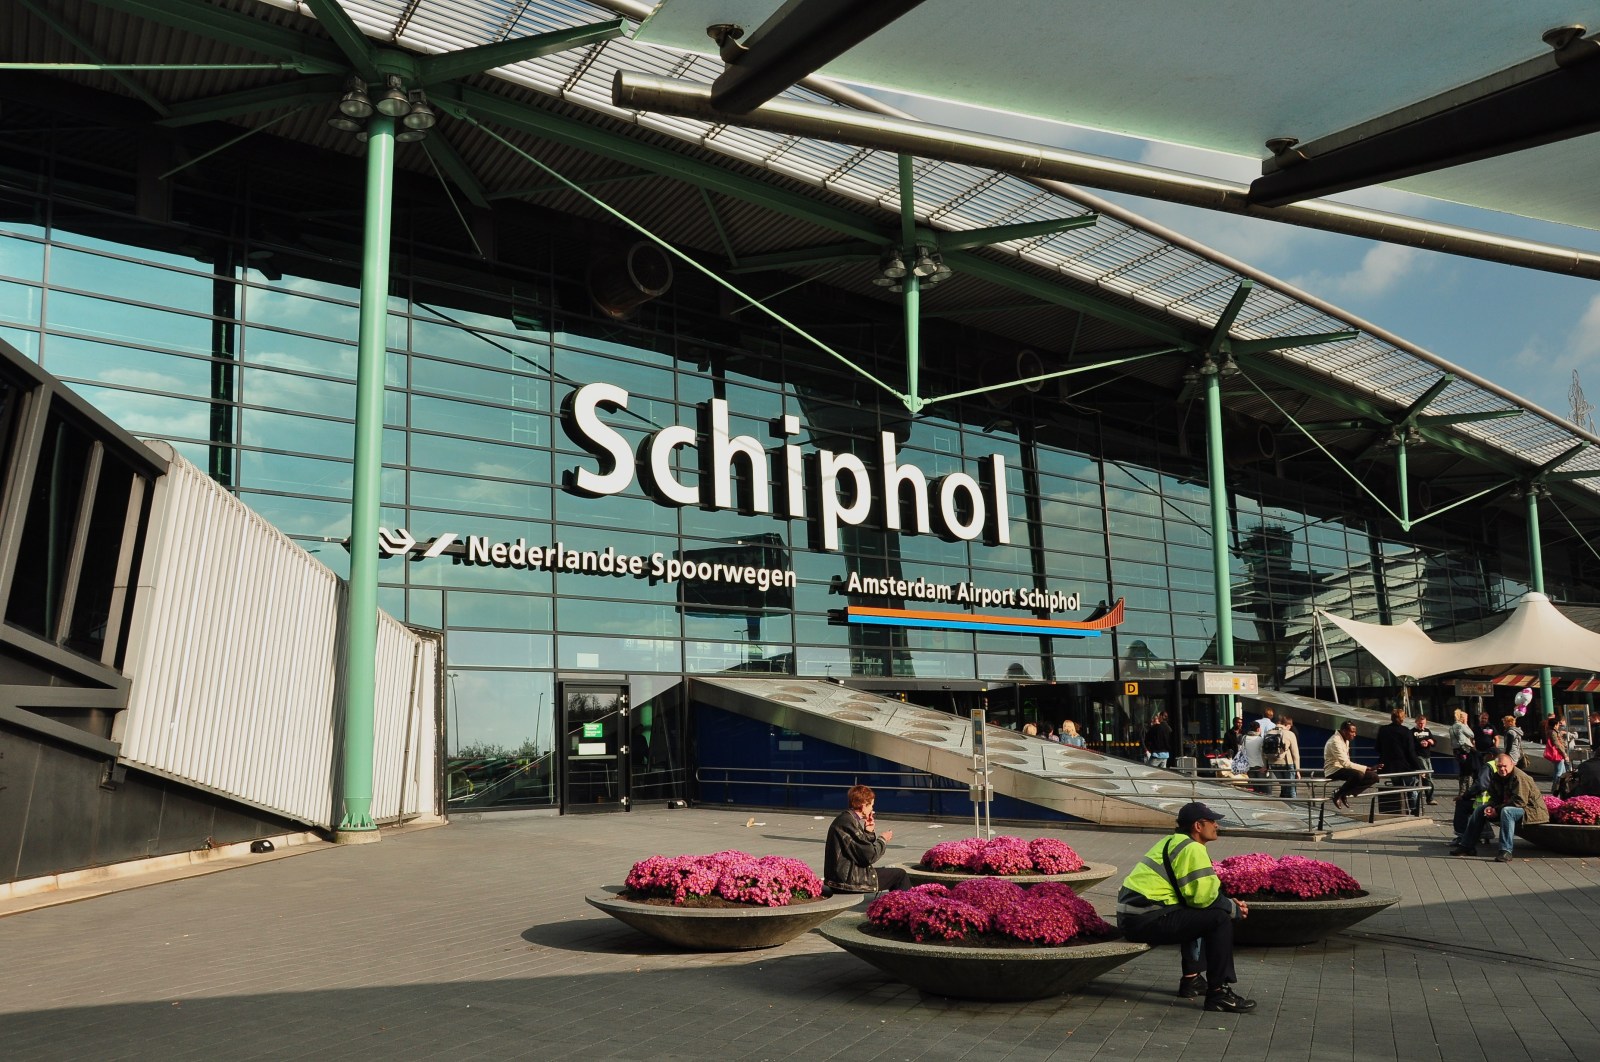 The main entrance to Schiphol airport in Amsterdam Netherlands